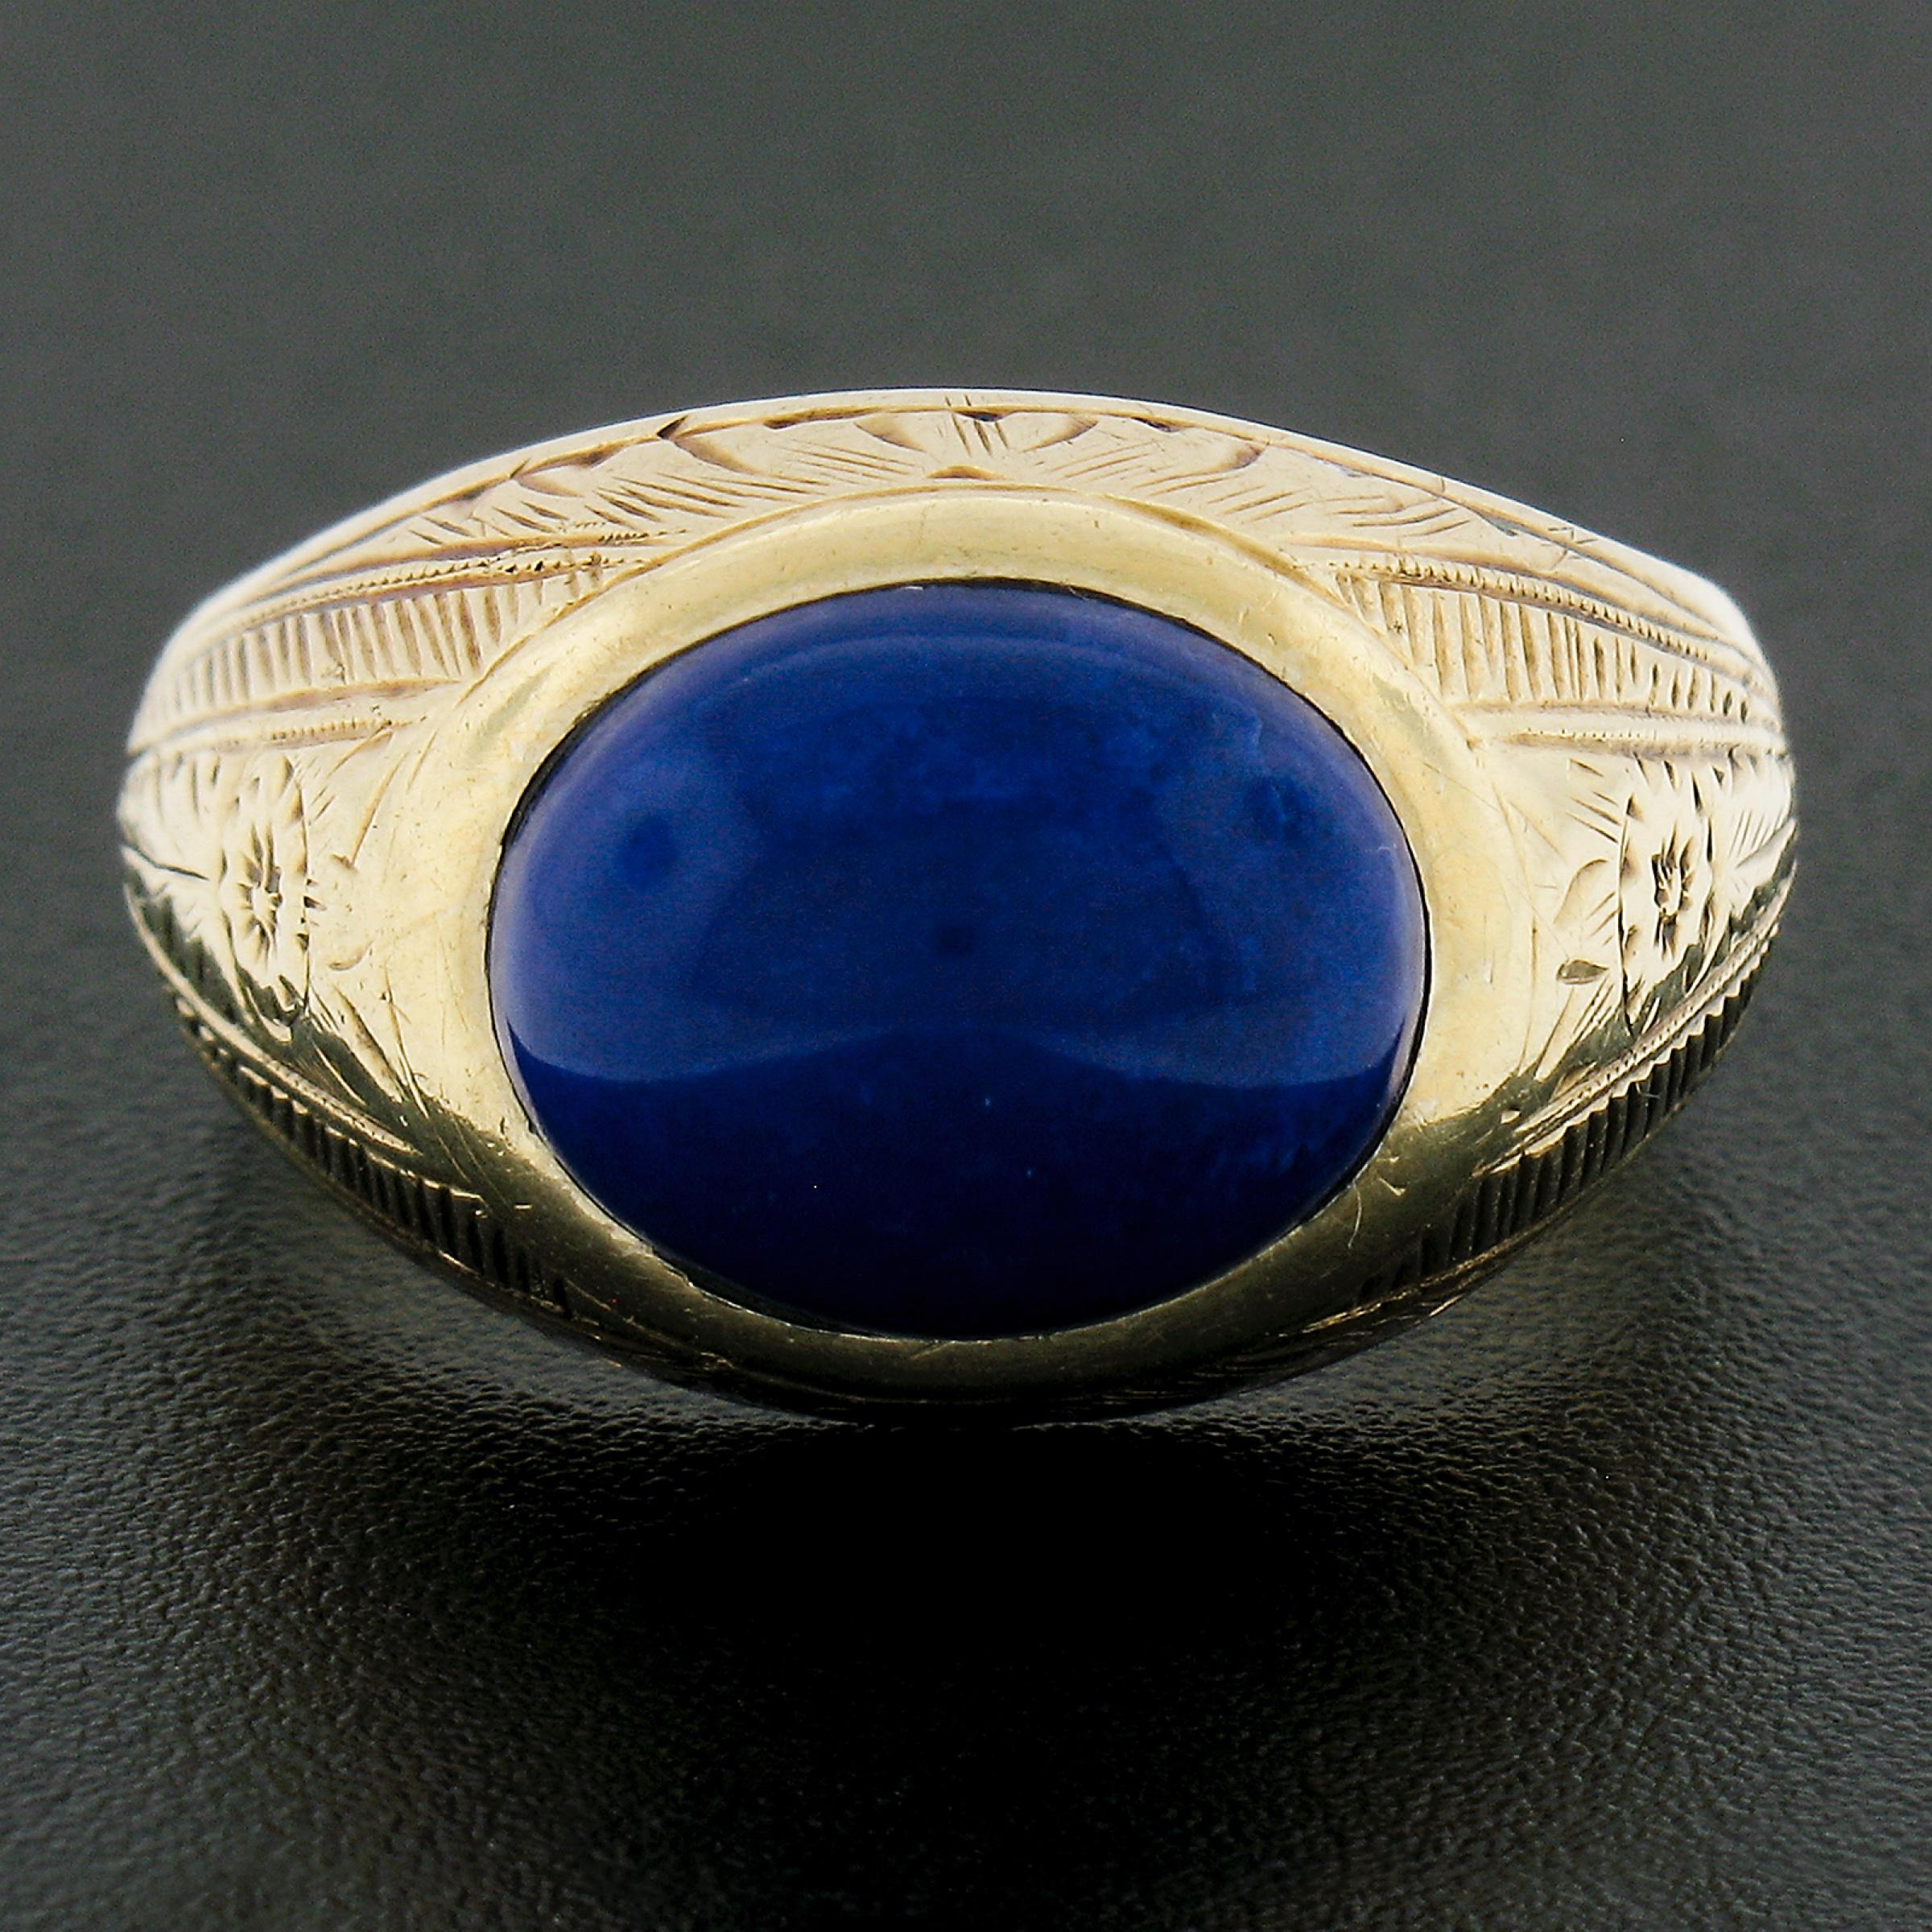 Here we have a magnificent antique men's ring that is crafted from solid 14k yellow gold and features a very high quality natural lapis solitaire neatly bezel set at the center. This oval cabochon cut stone displays a nice large size with an